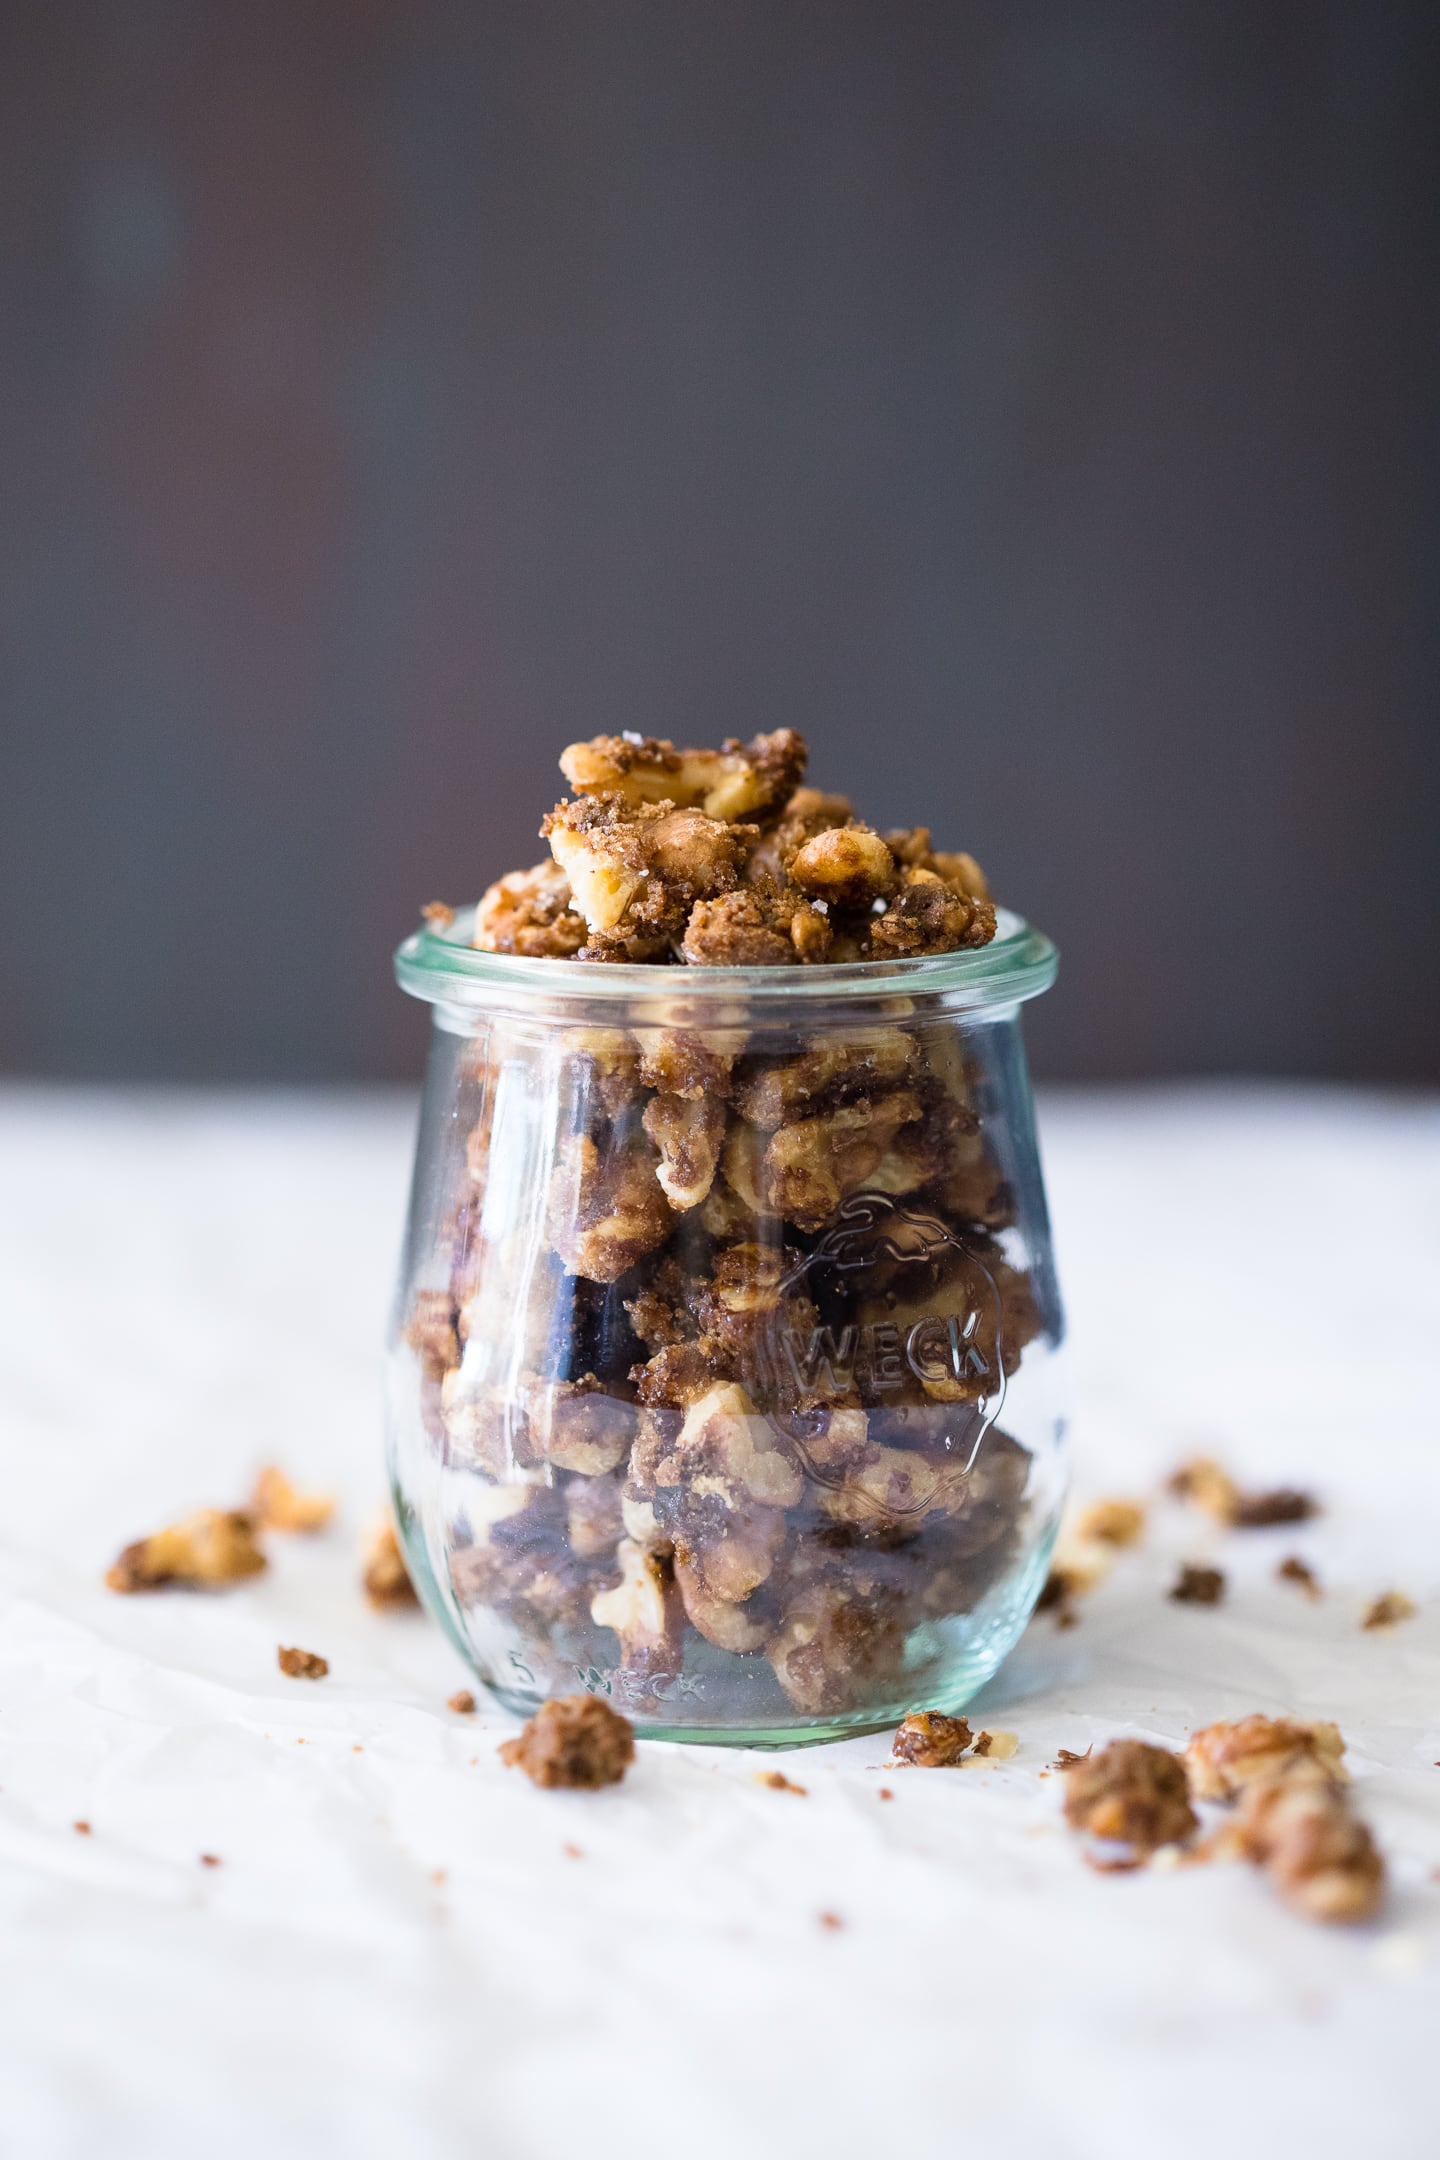 Front-facing close-up of candied walnuts in a Weck Jar, sitting on a piece of parchment paper with scattered walnut pieces surrounding it.